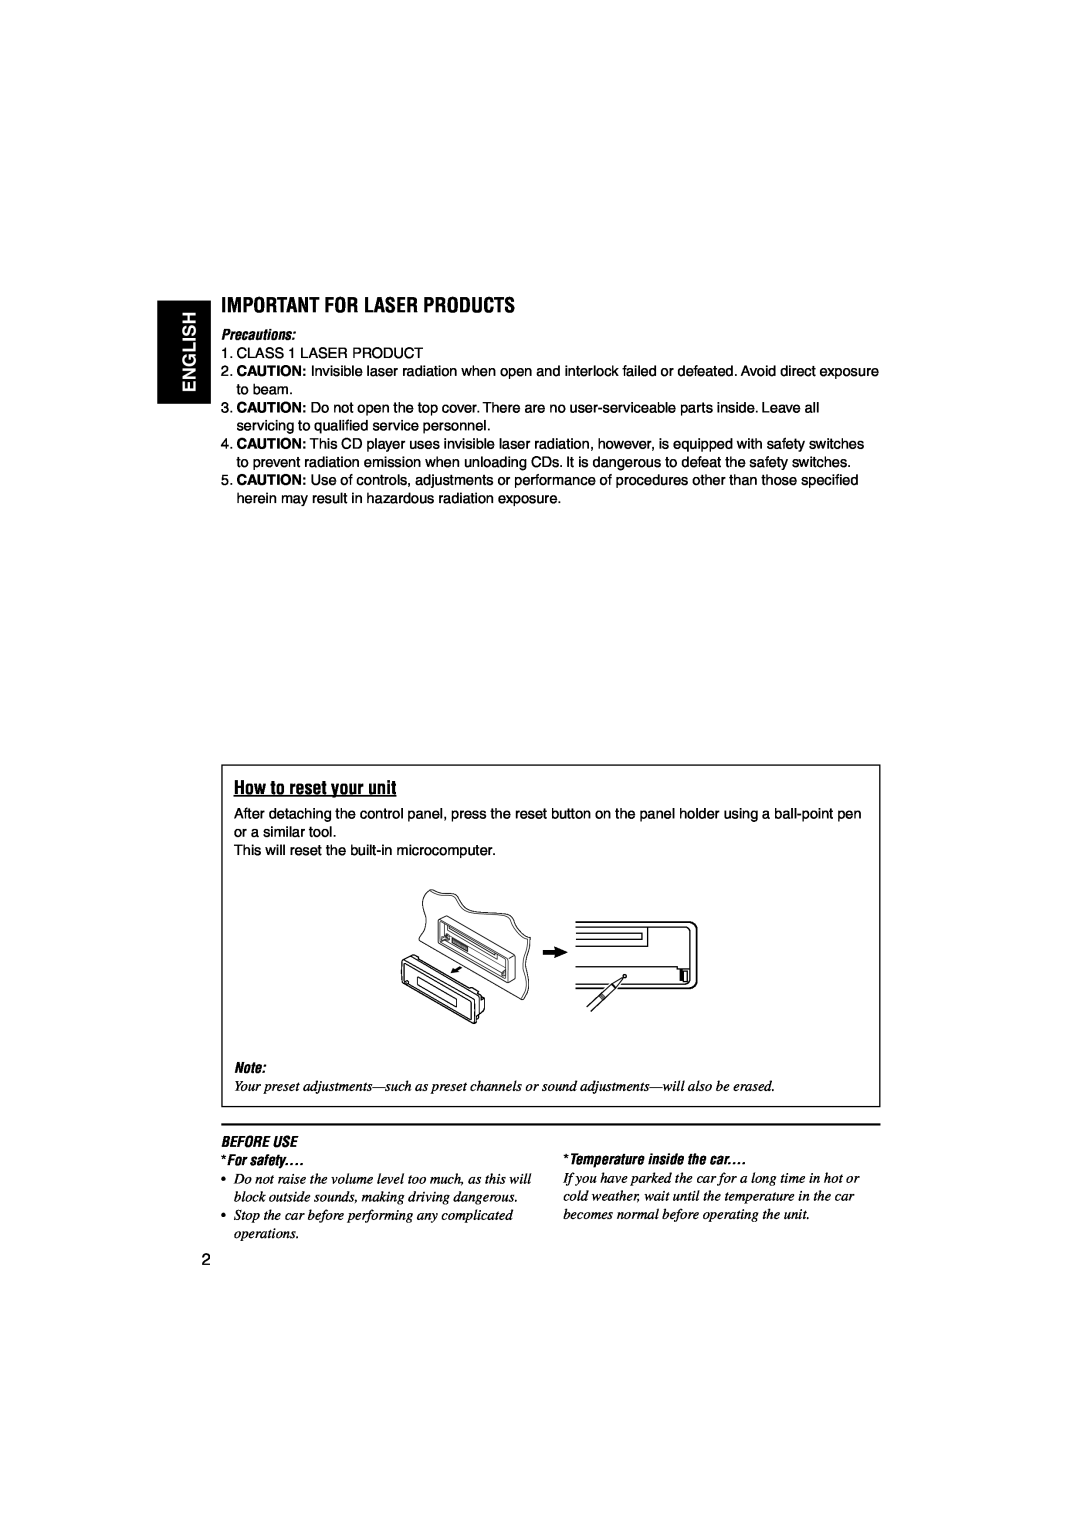 JVC KD-S795 manual Important For Laser Products, English, How to reset your unit, Precautions, BEFORE USE For safety 